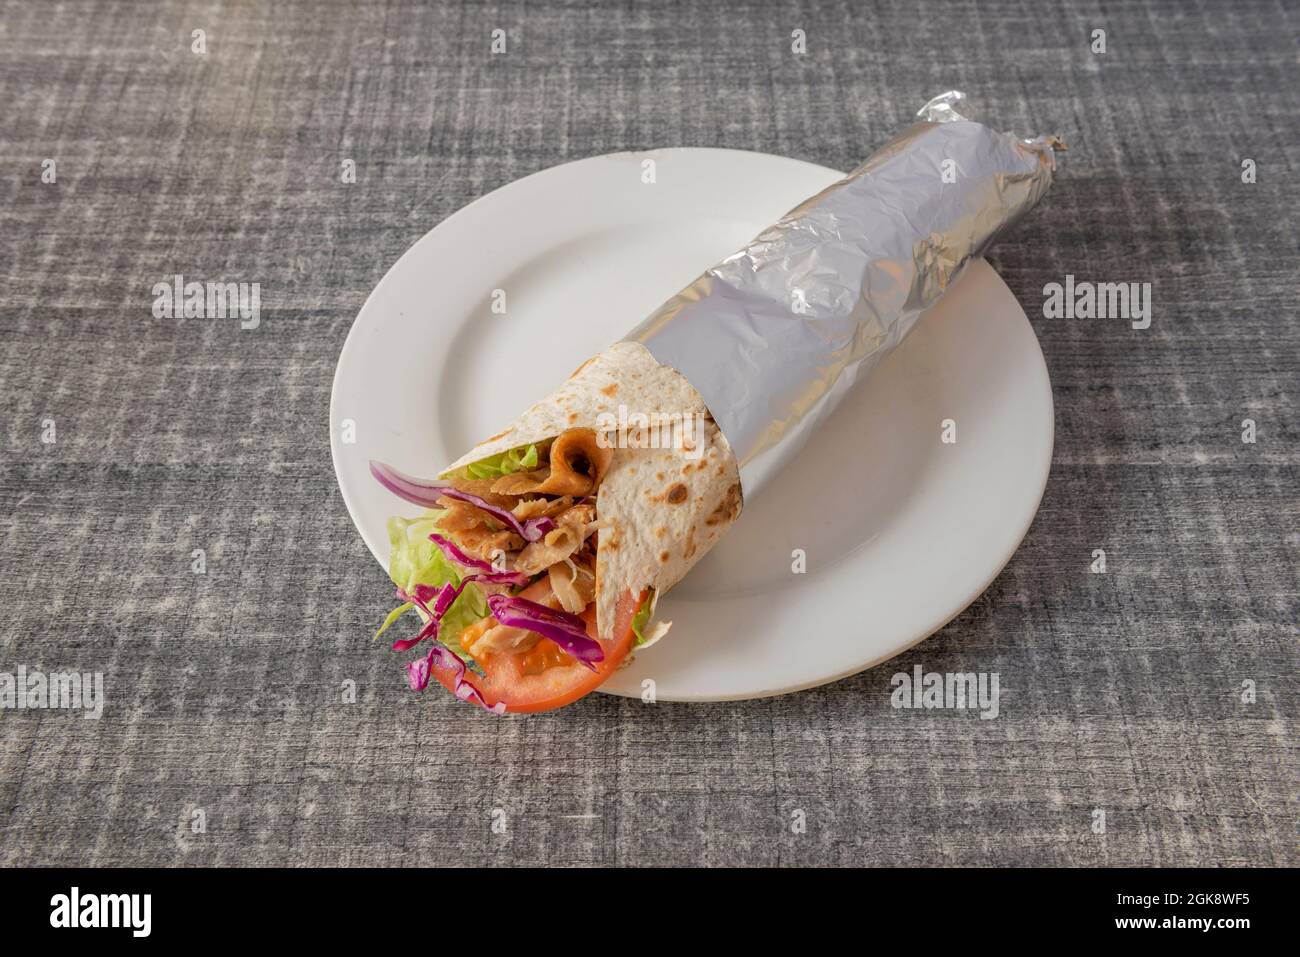 Durum typical of a popular kebab restaurant with lamb meat from the roll with red onion, kale, tomato and lettuce wrapped in aluminum foil Stock Photo